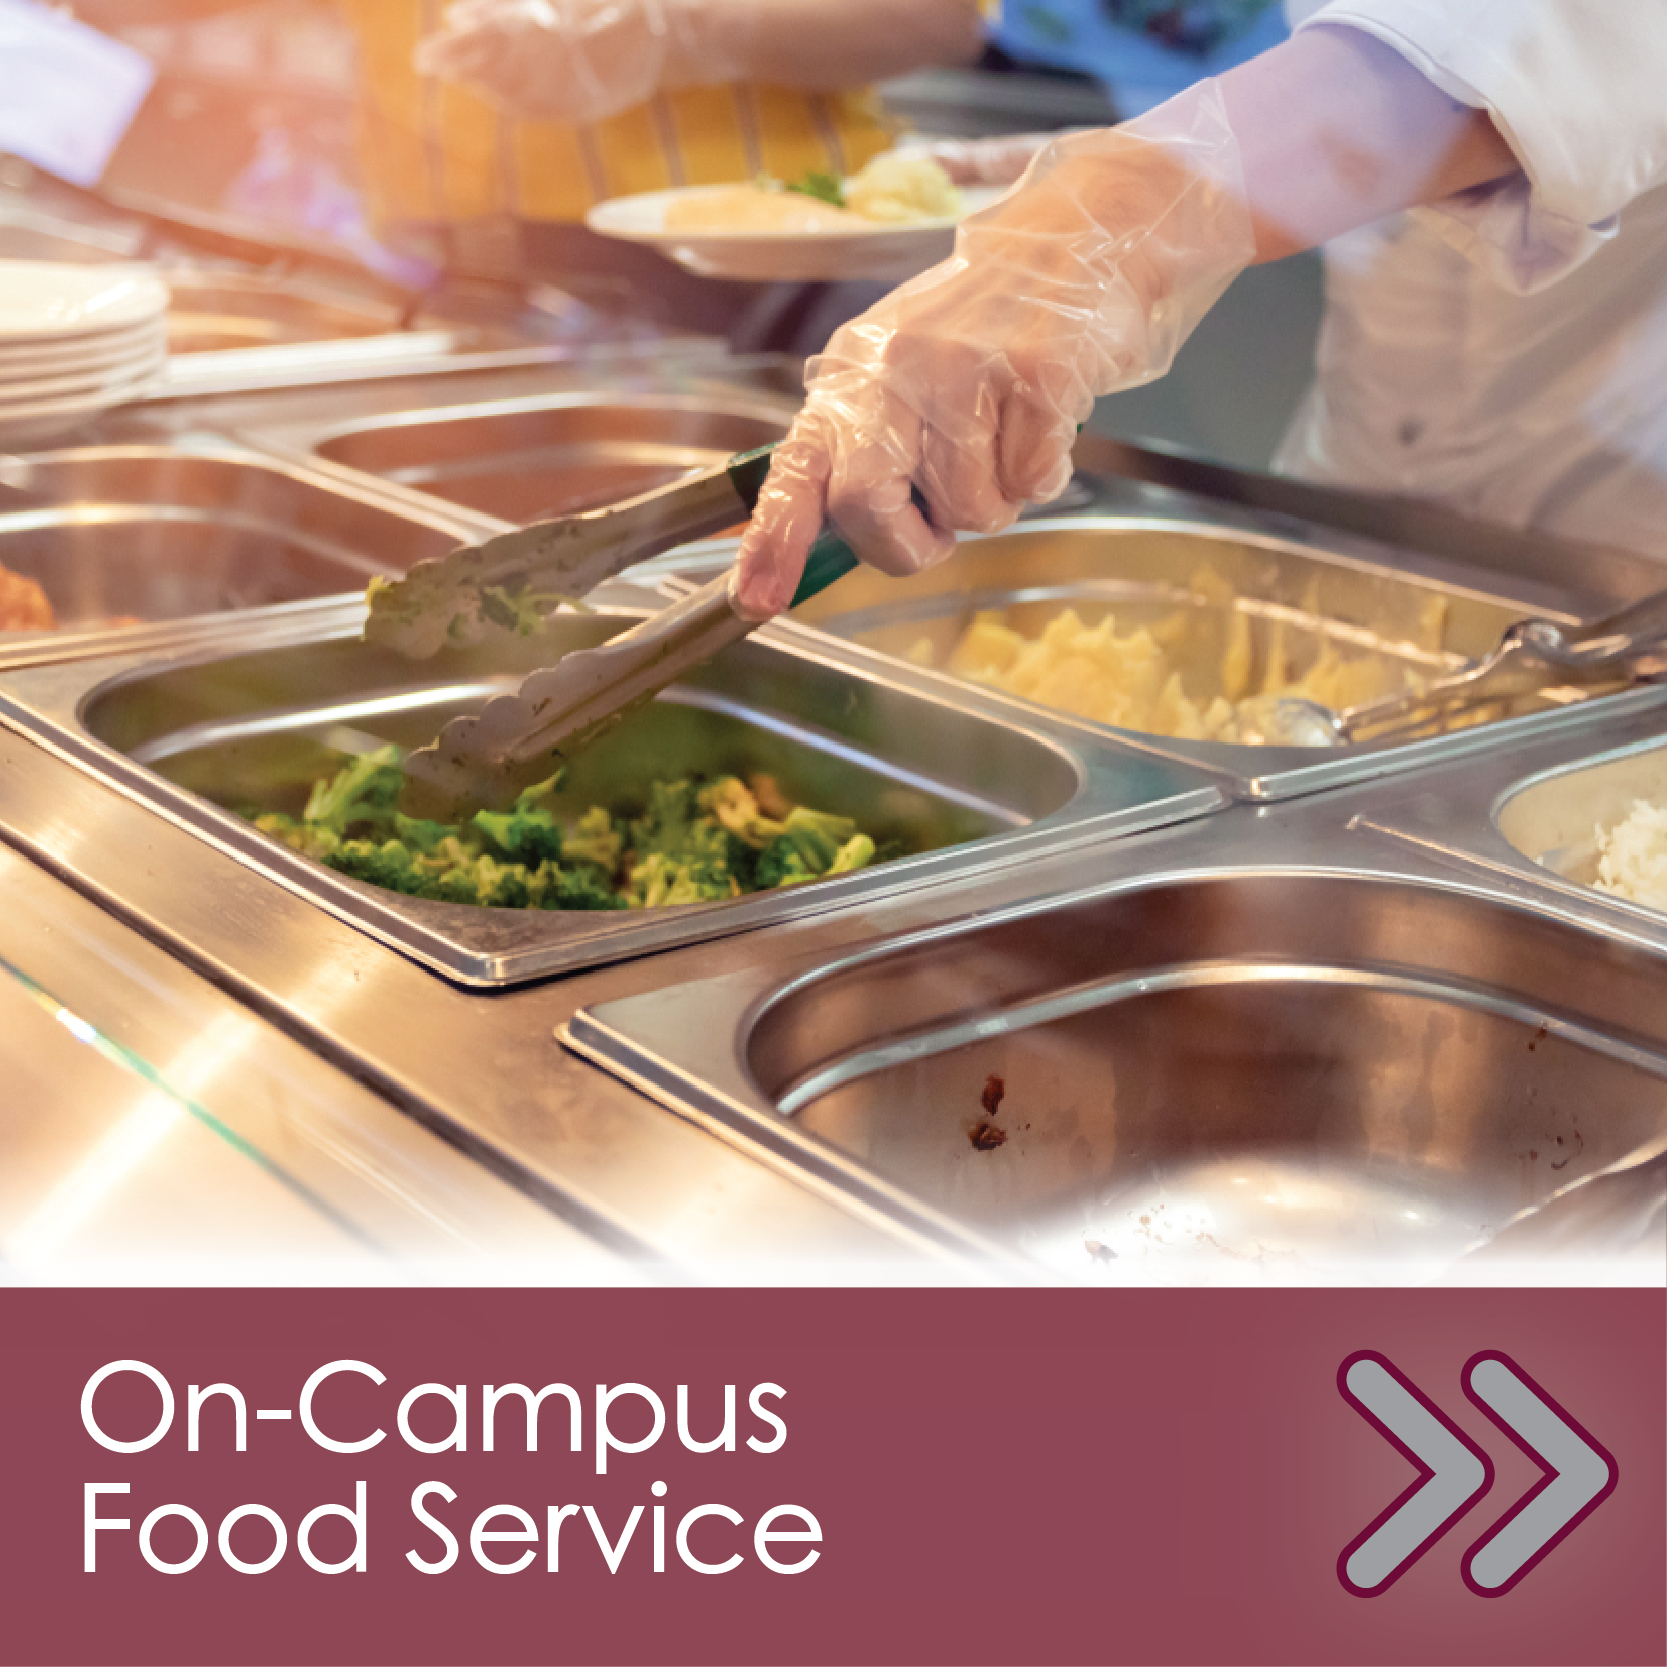 On-Campus Food Service